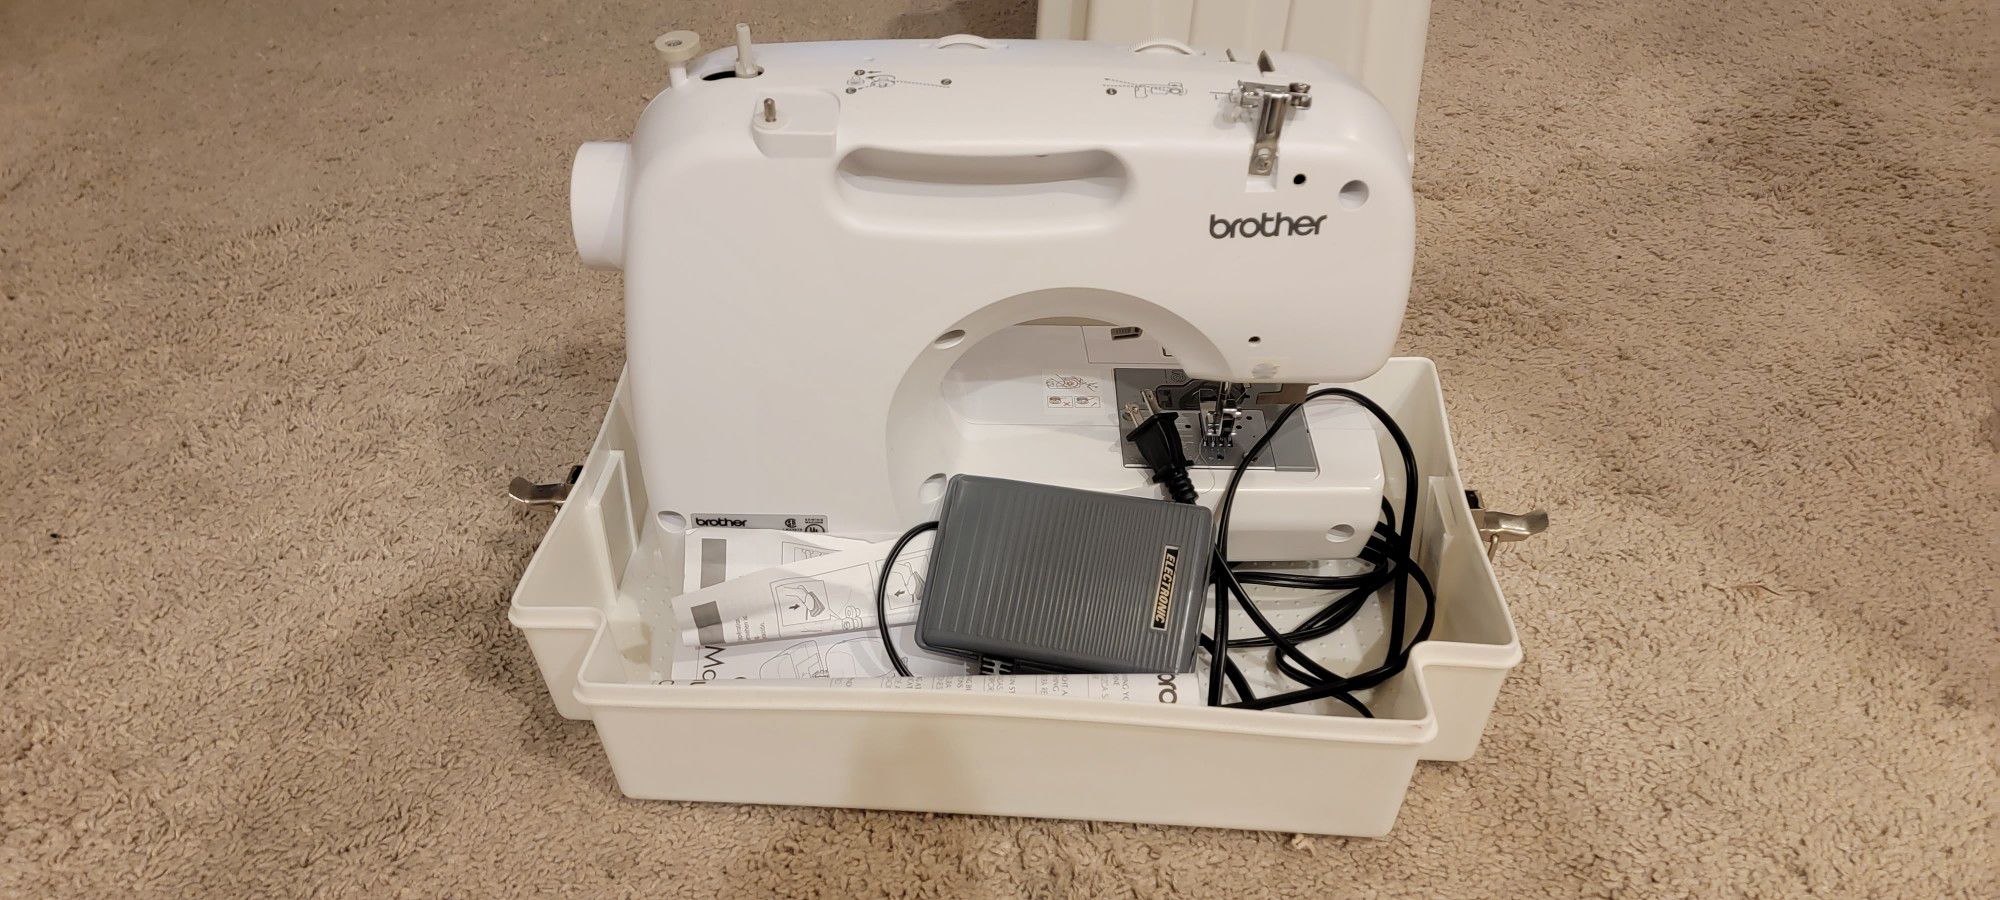 Brother Sewing Machine With Carrying Case